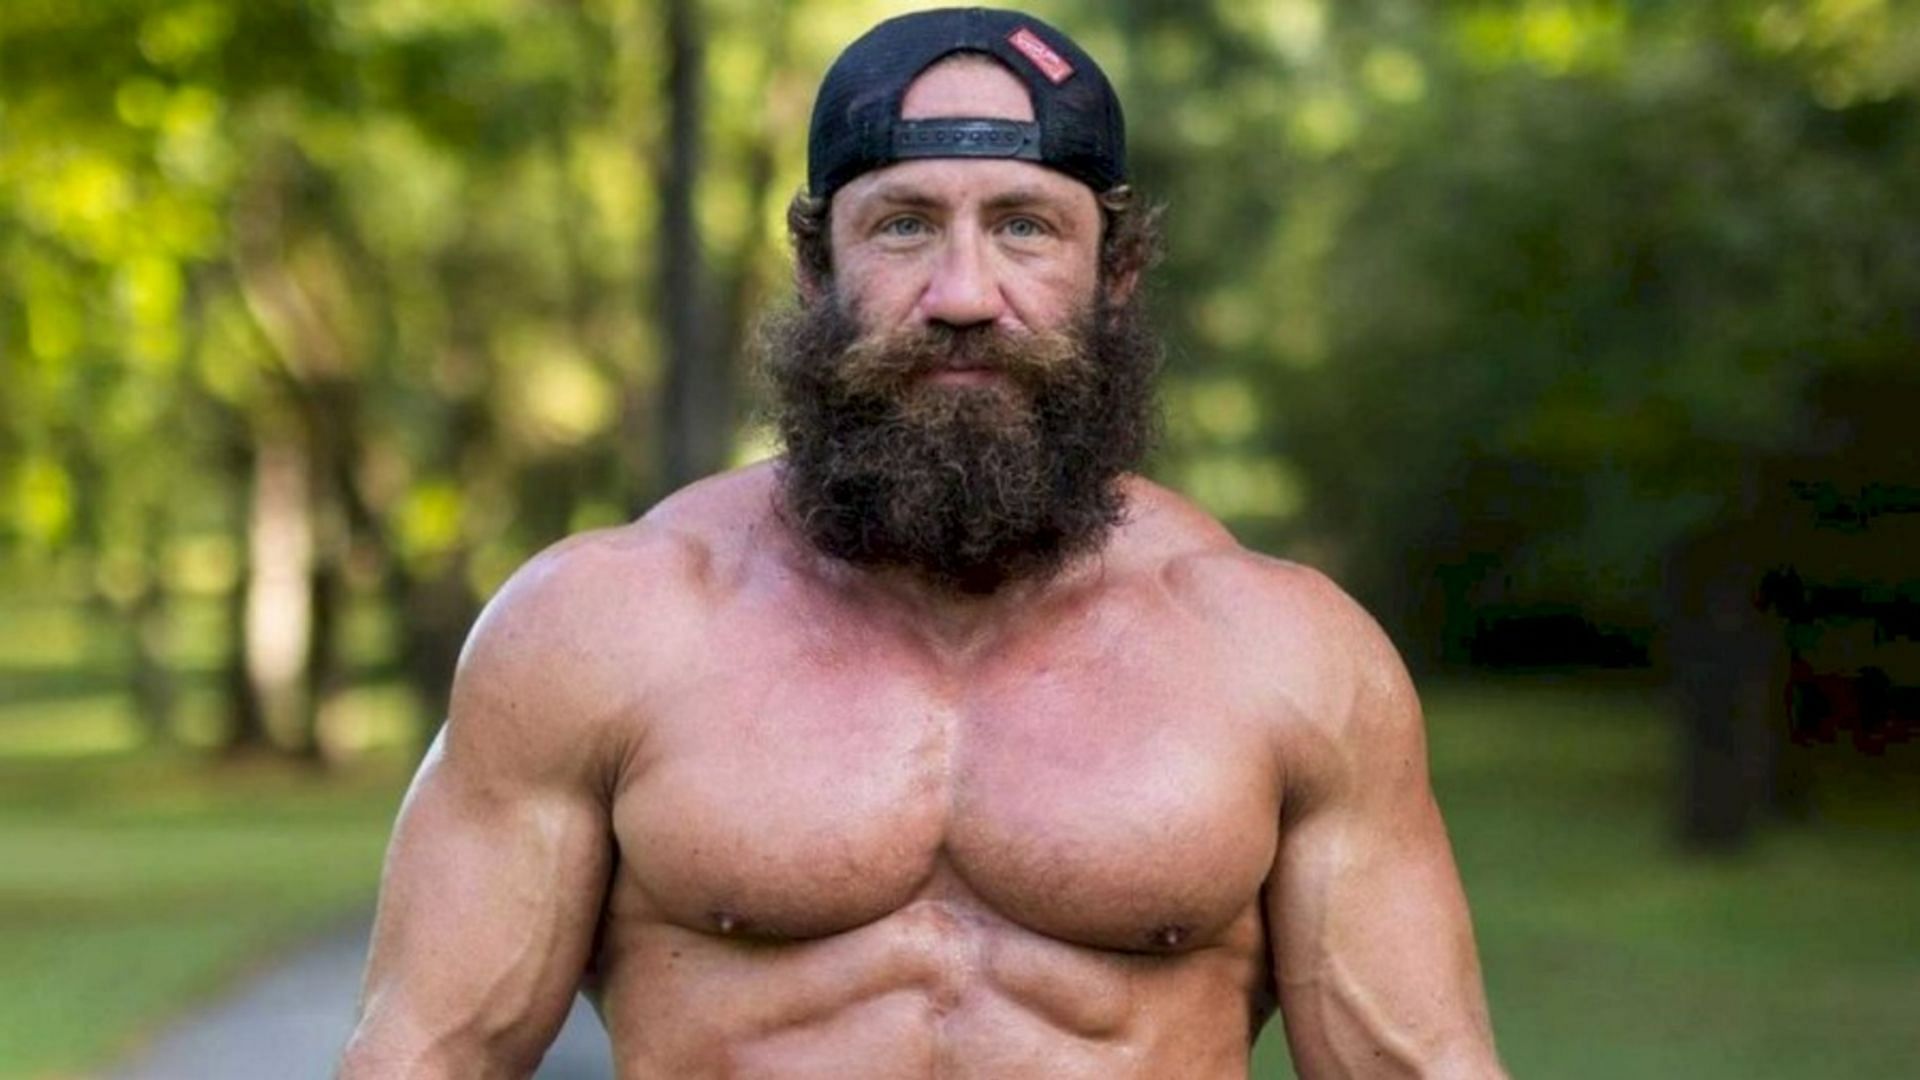 YouTuber exposes Liver King for taking steroids to build muscular physique (Image via DMARGE)